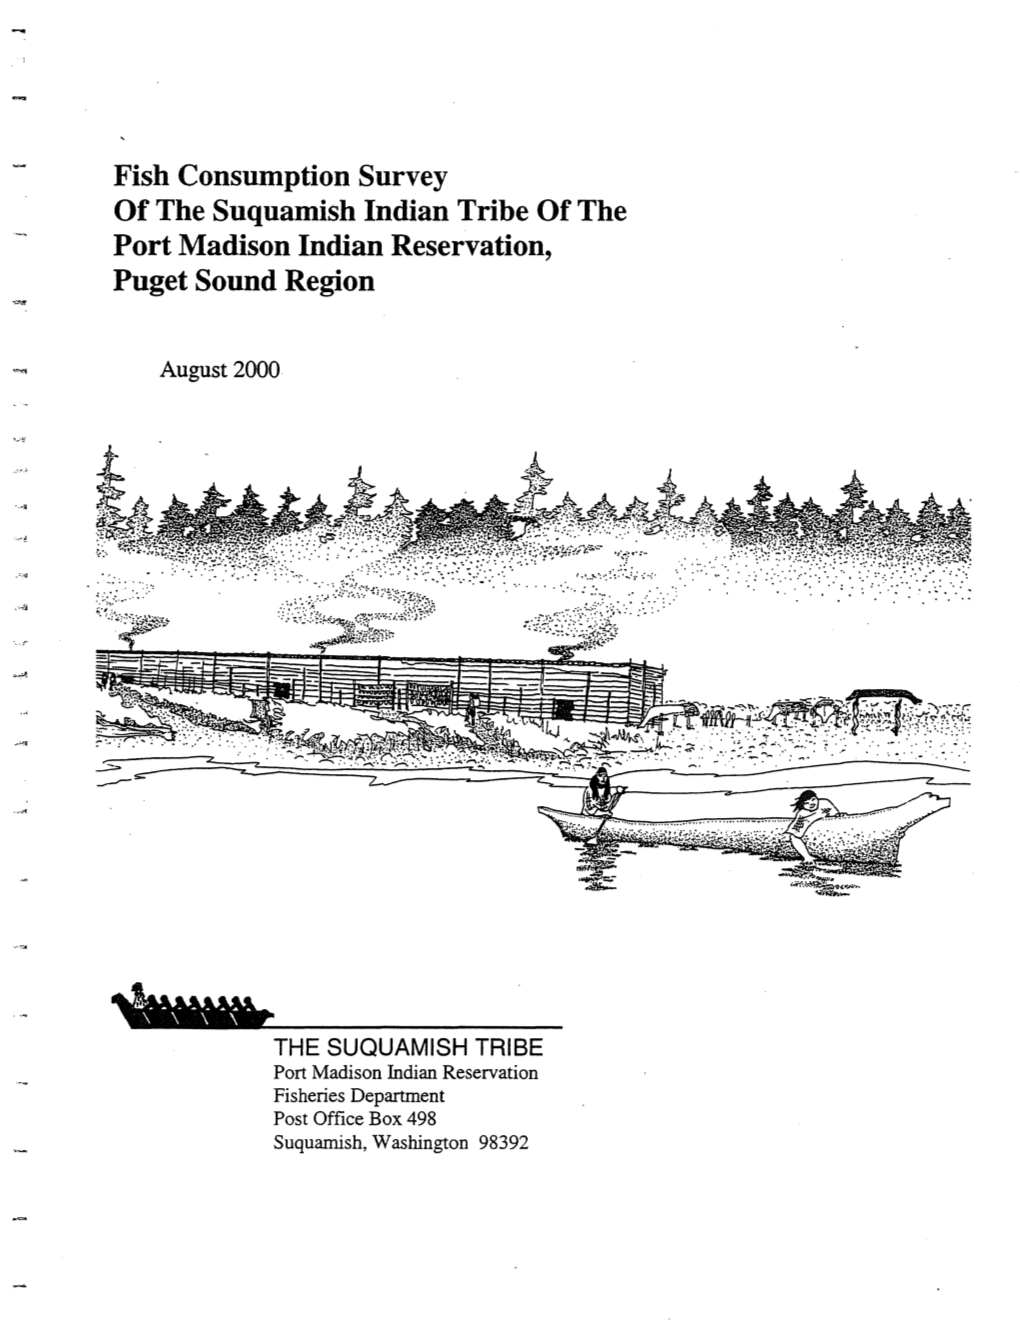 Fish Consumption Survey of the Suquamish Indian Tribe of the Port Madison Indian Reservation, Puget Sound Region